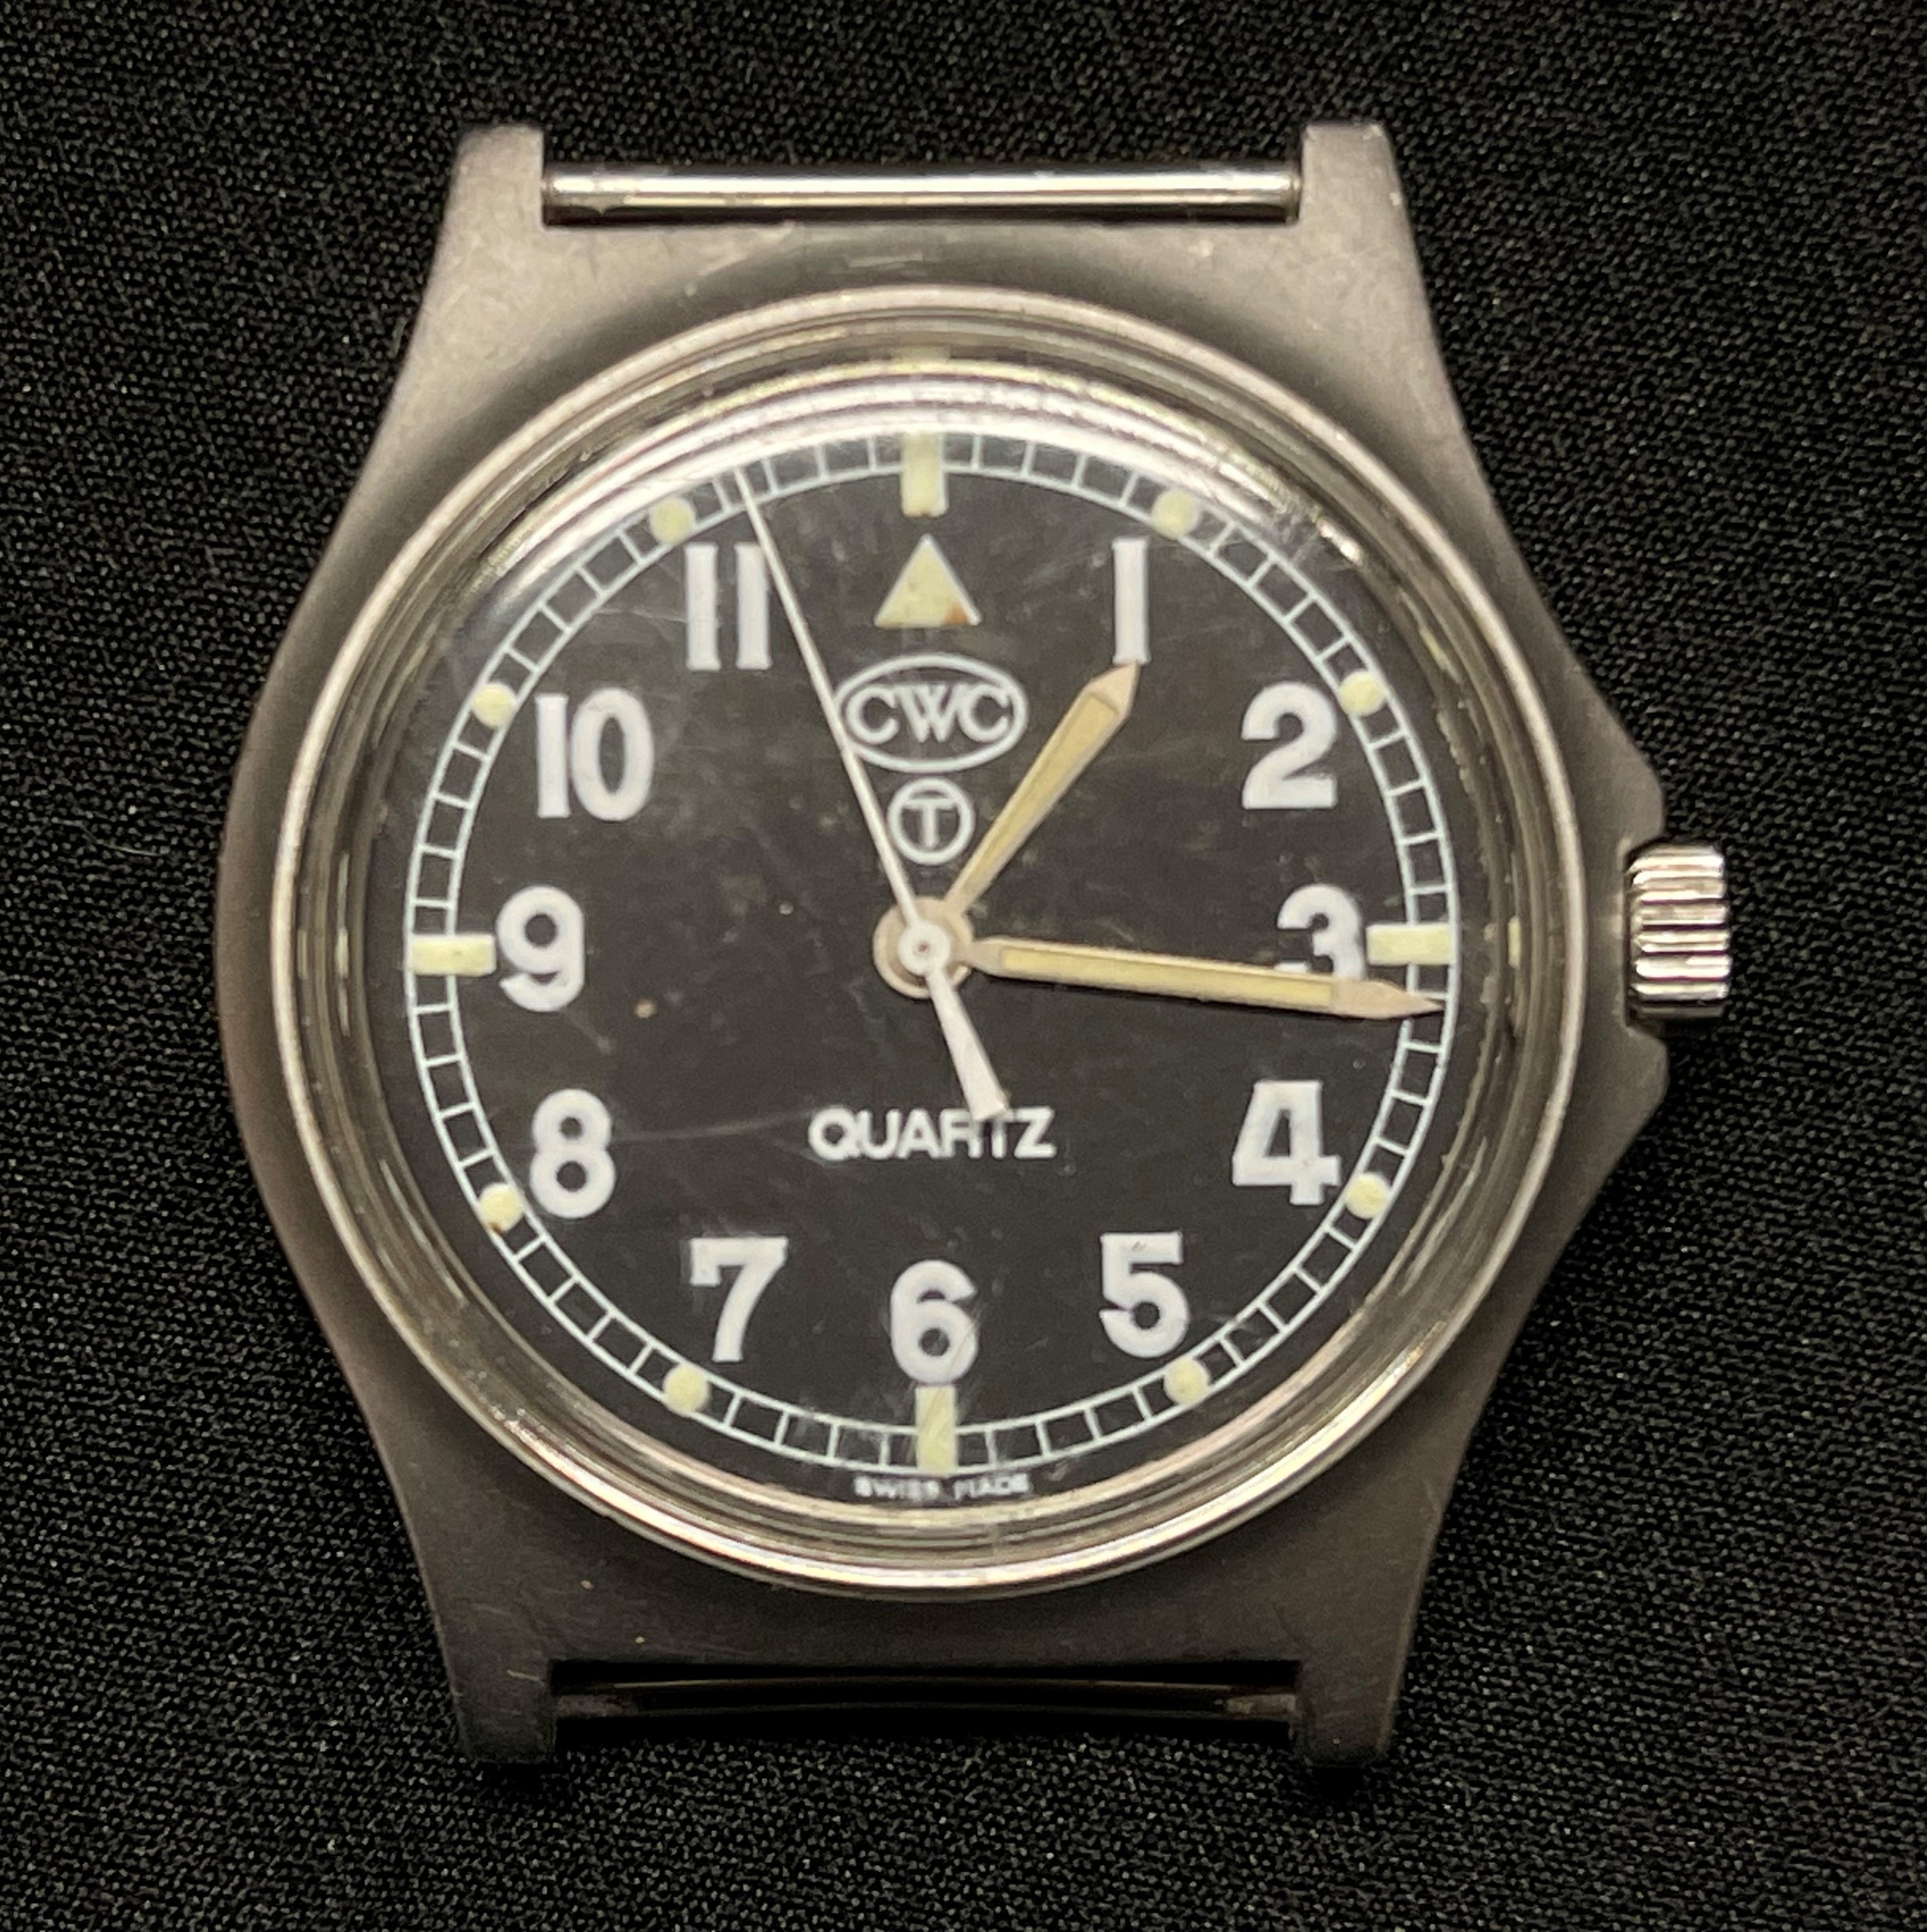 British Royal Navy Issue Quartz Wristwatch by CWC with Hacking Seconds 1989. Black dial with - Image 2 of 4